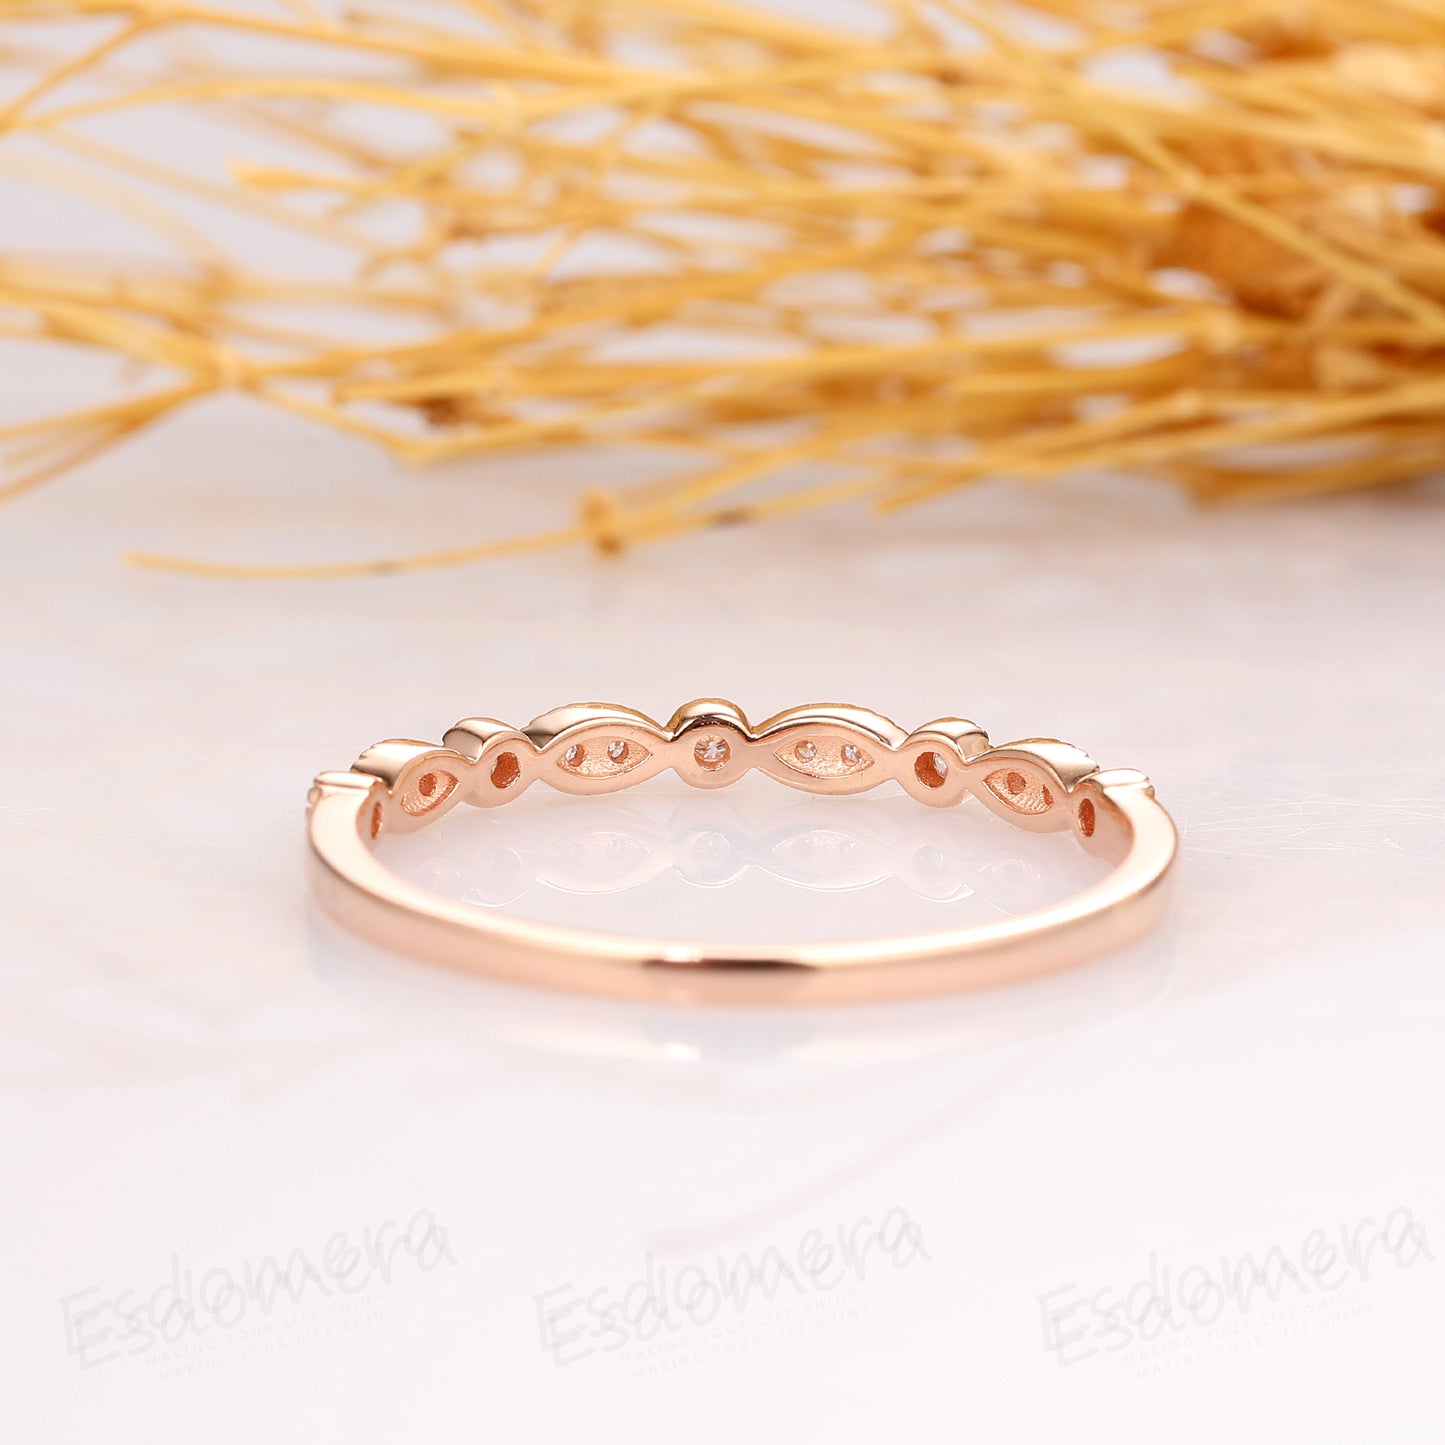 Half Eternity Pave Set Accents Moissanite Ring, 14k Rose Gold Wedding Ring